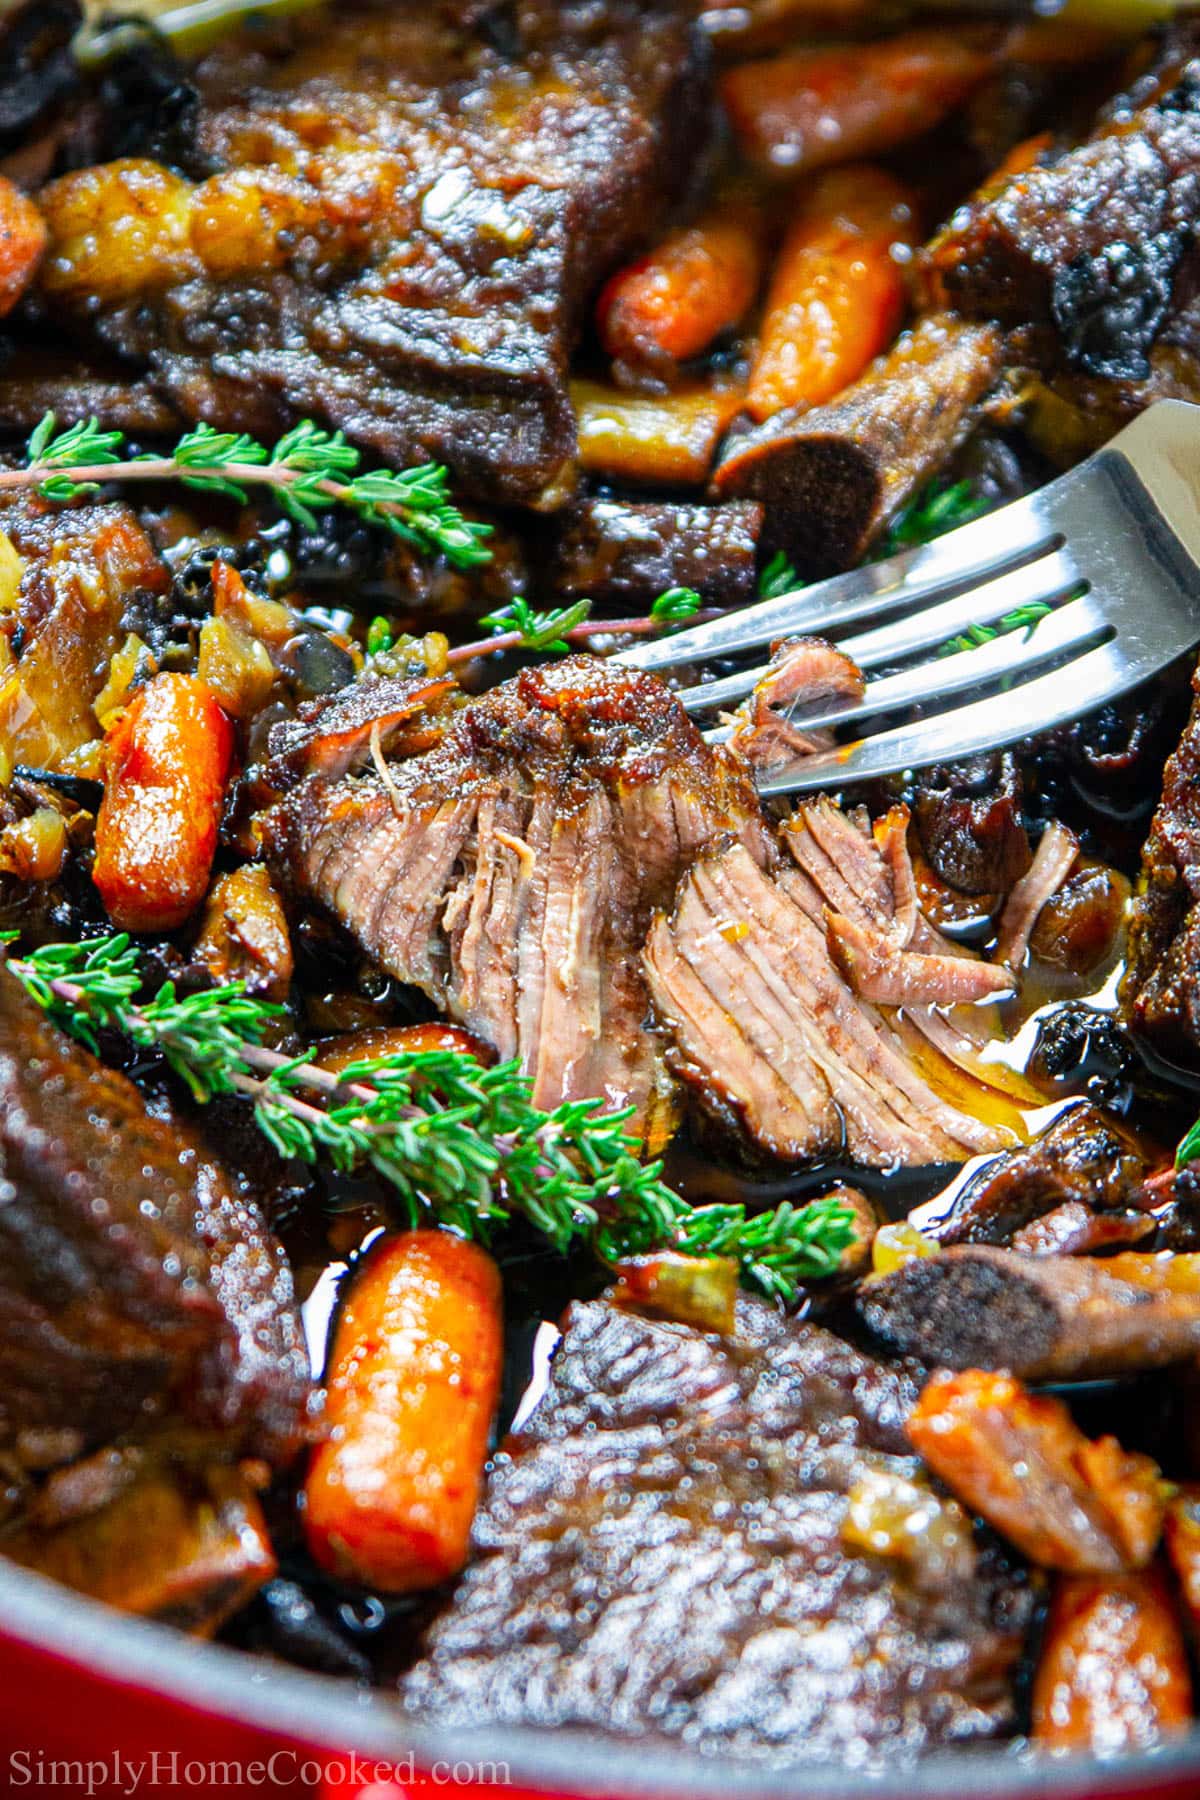 Vertical close up image of Braised Beef Short Ribs on a fork